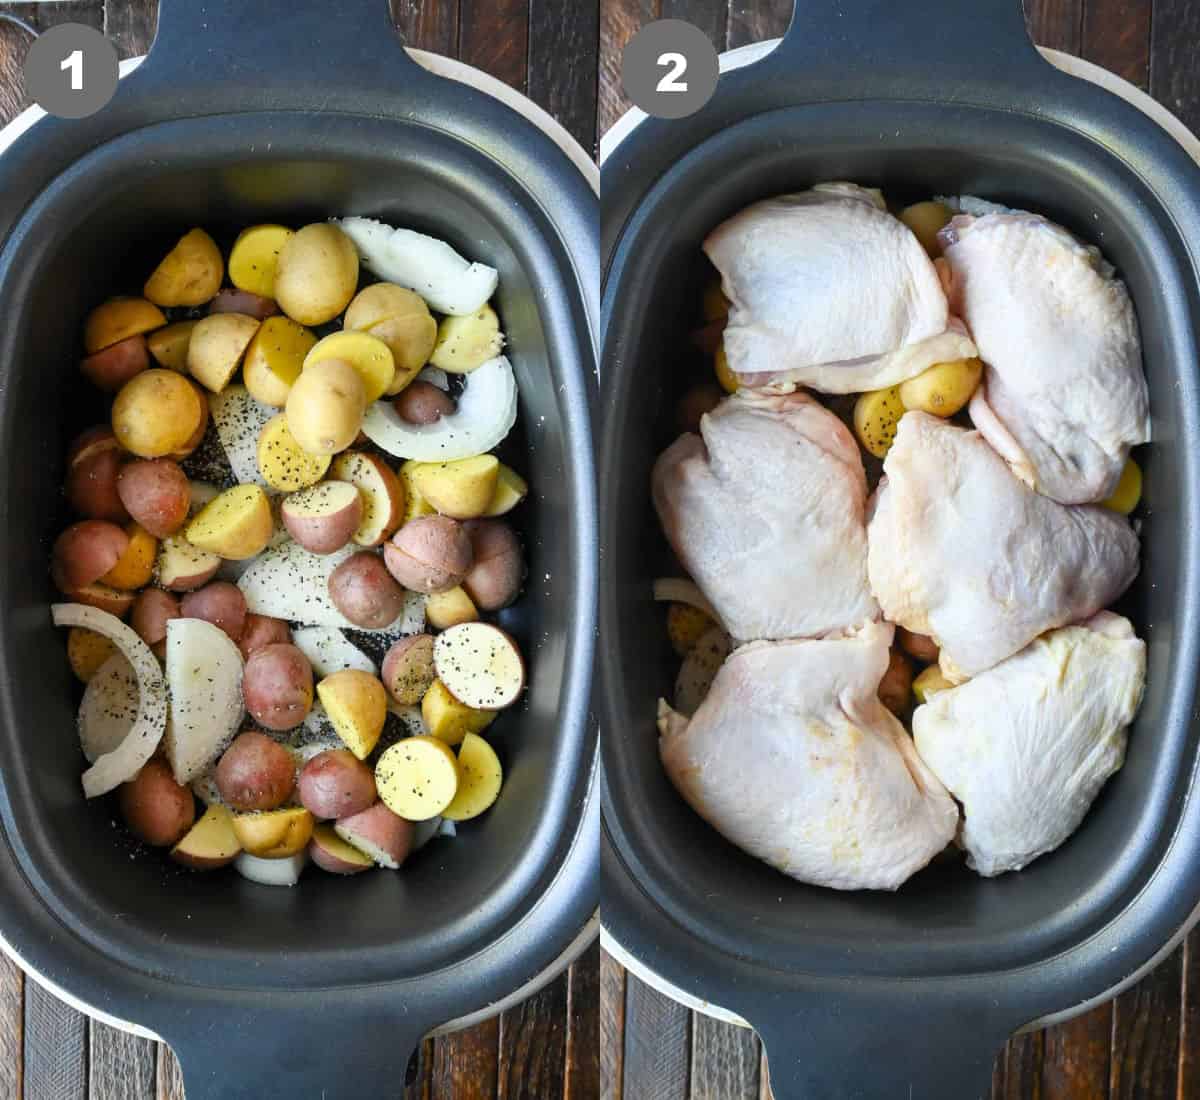 Potatoes and onions added to the bottom of a slow cooker then chicken thighs placed on top.